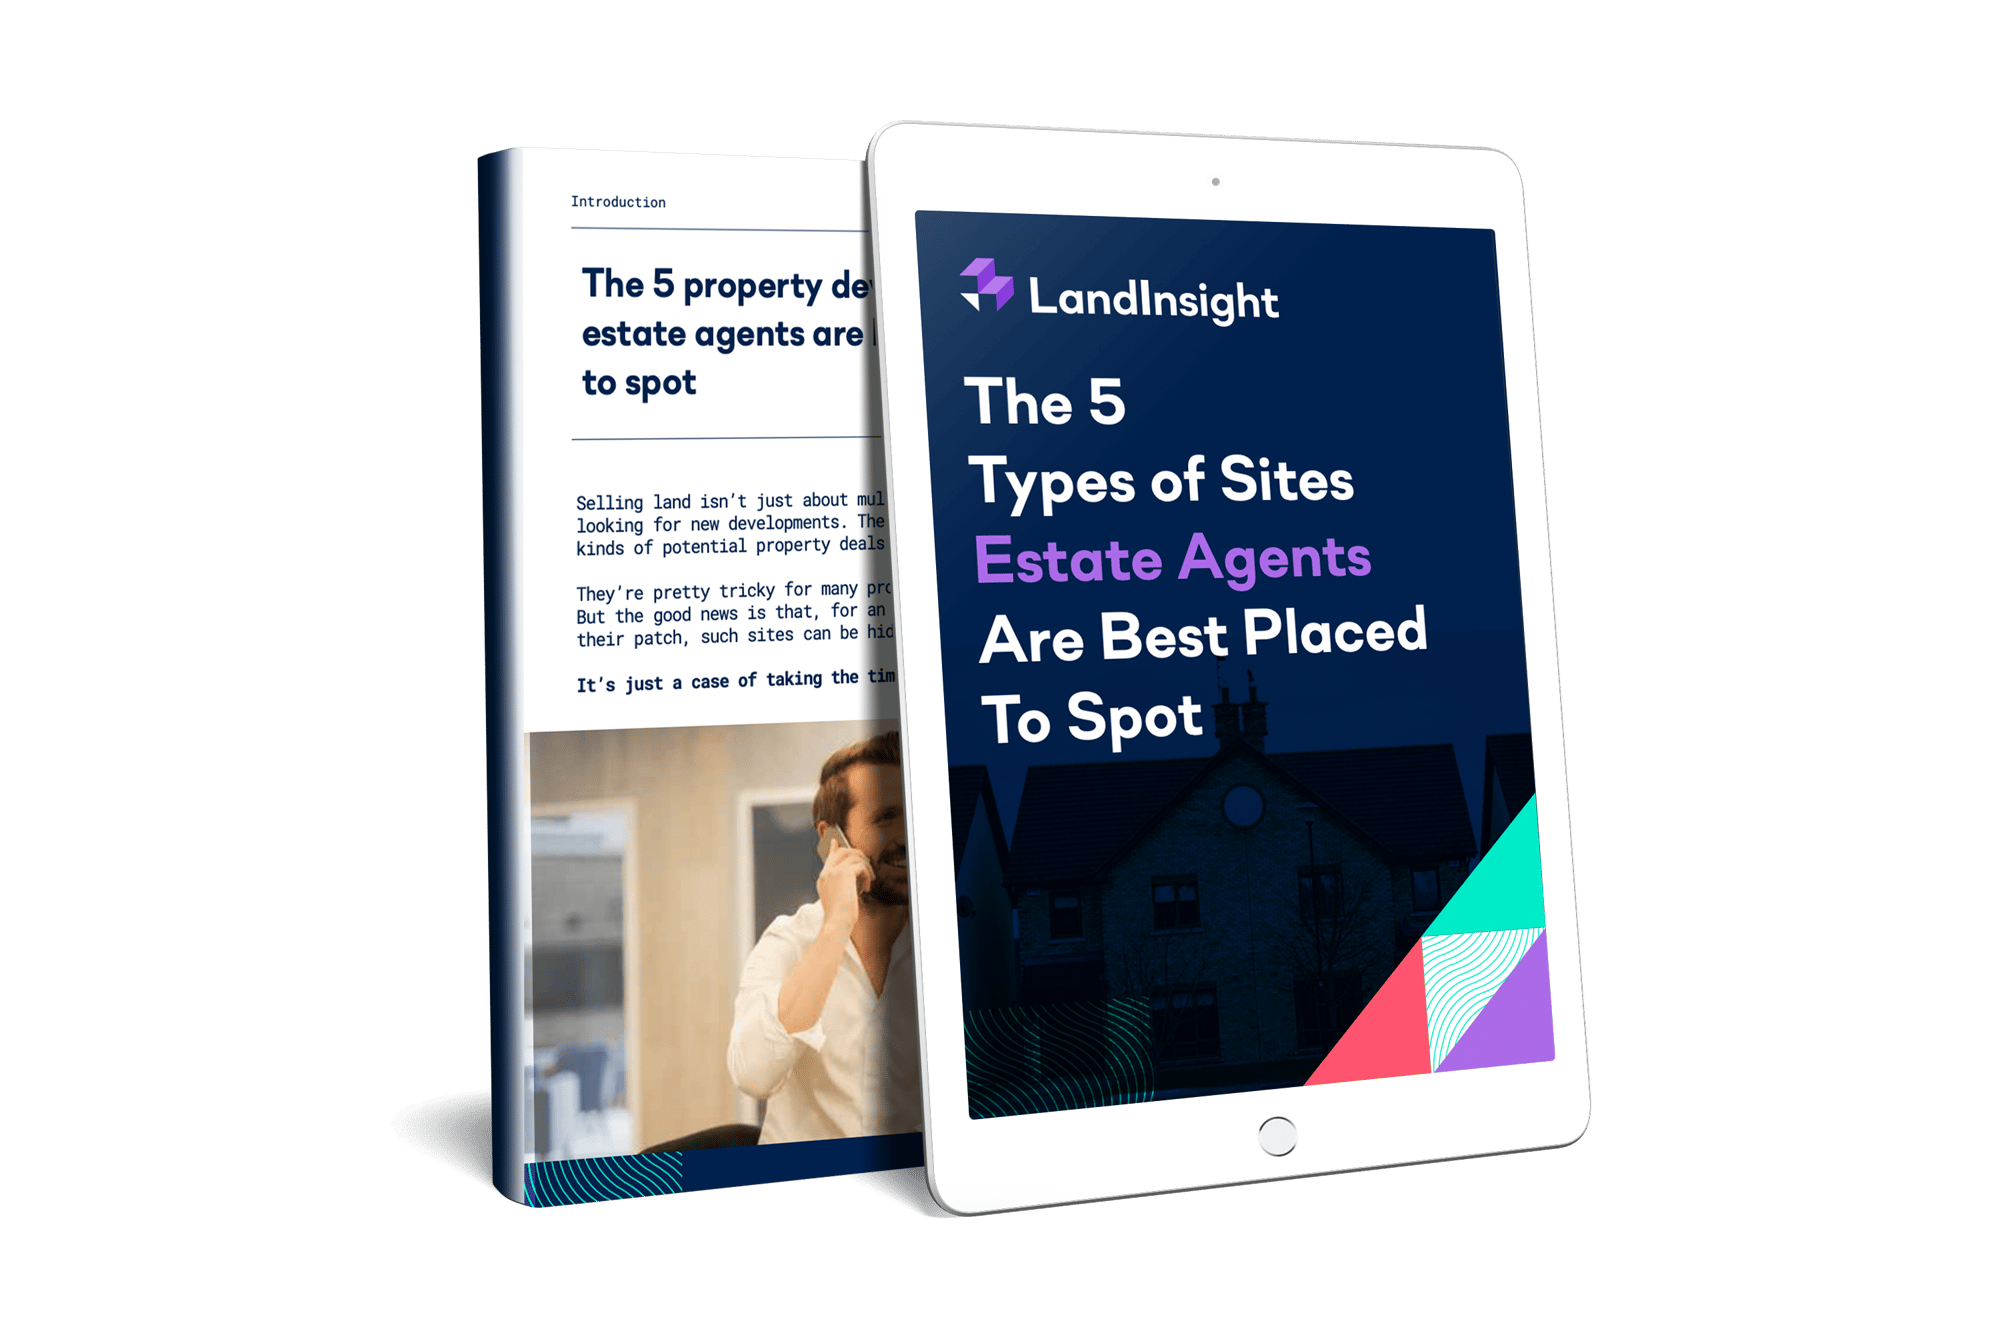 The 5 types of sites estate agents are best placed to spot